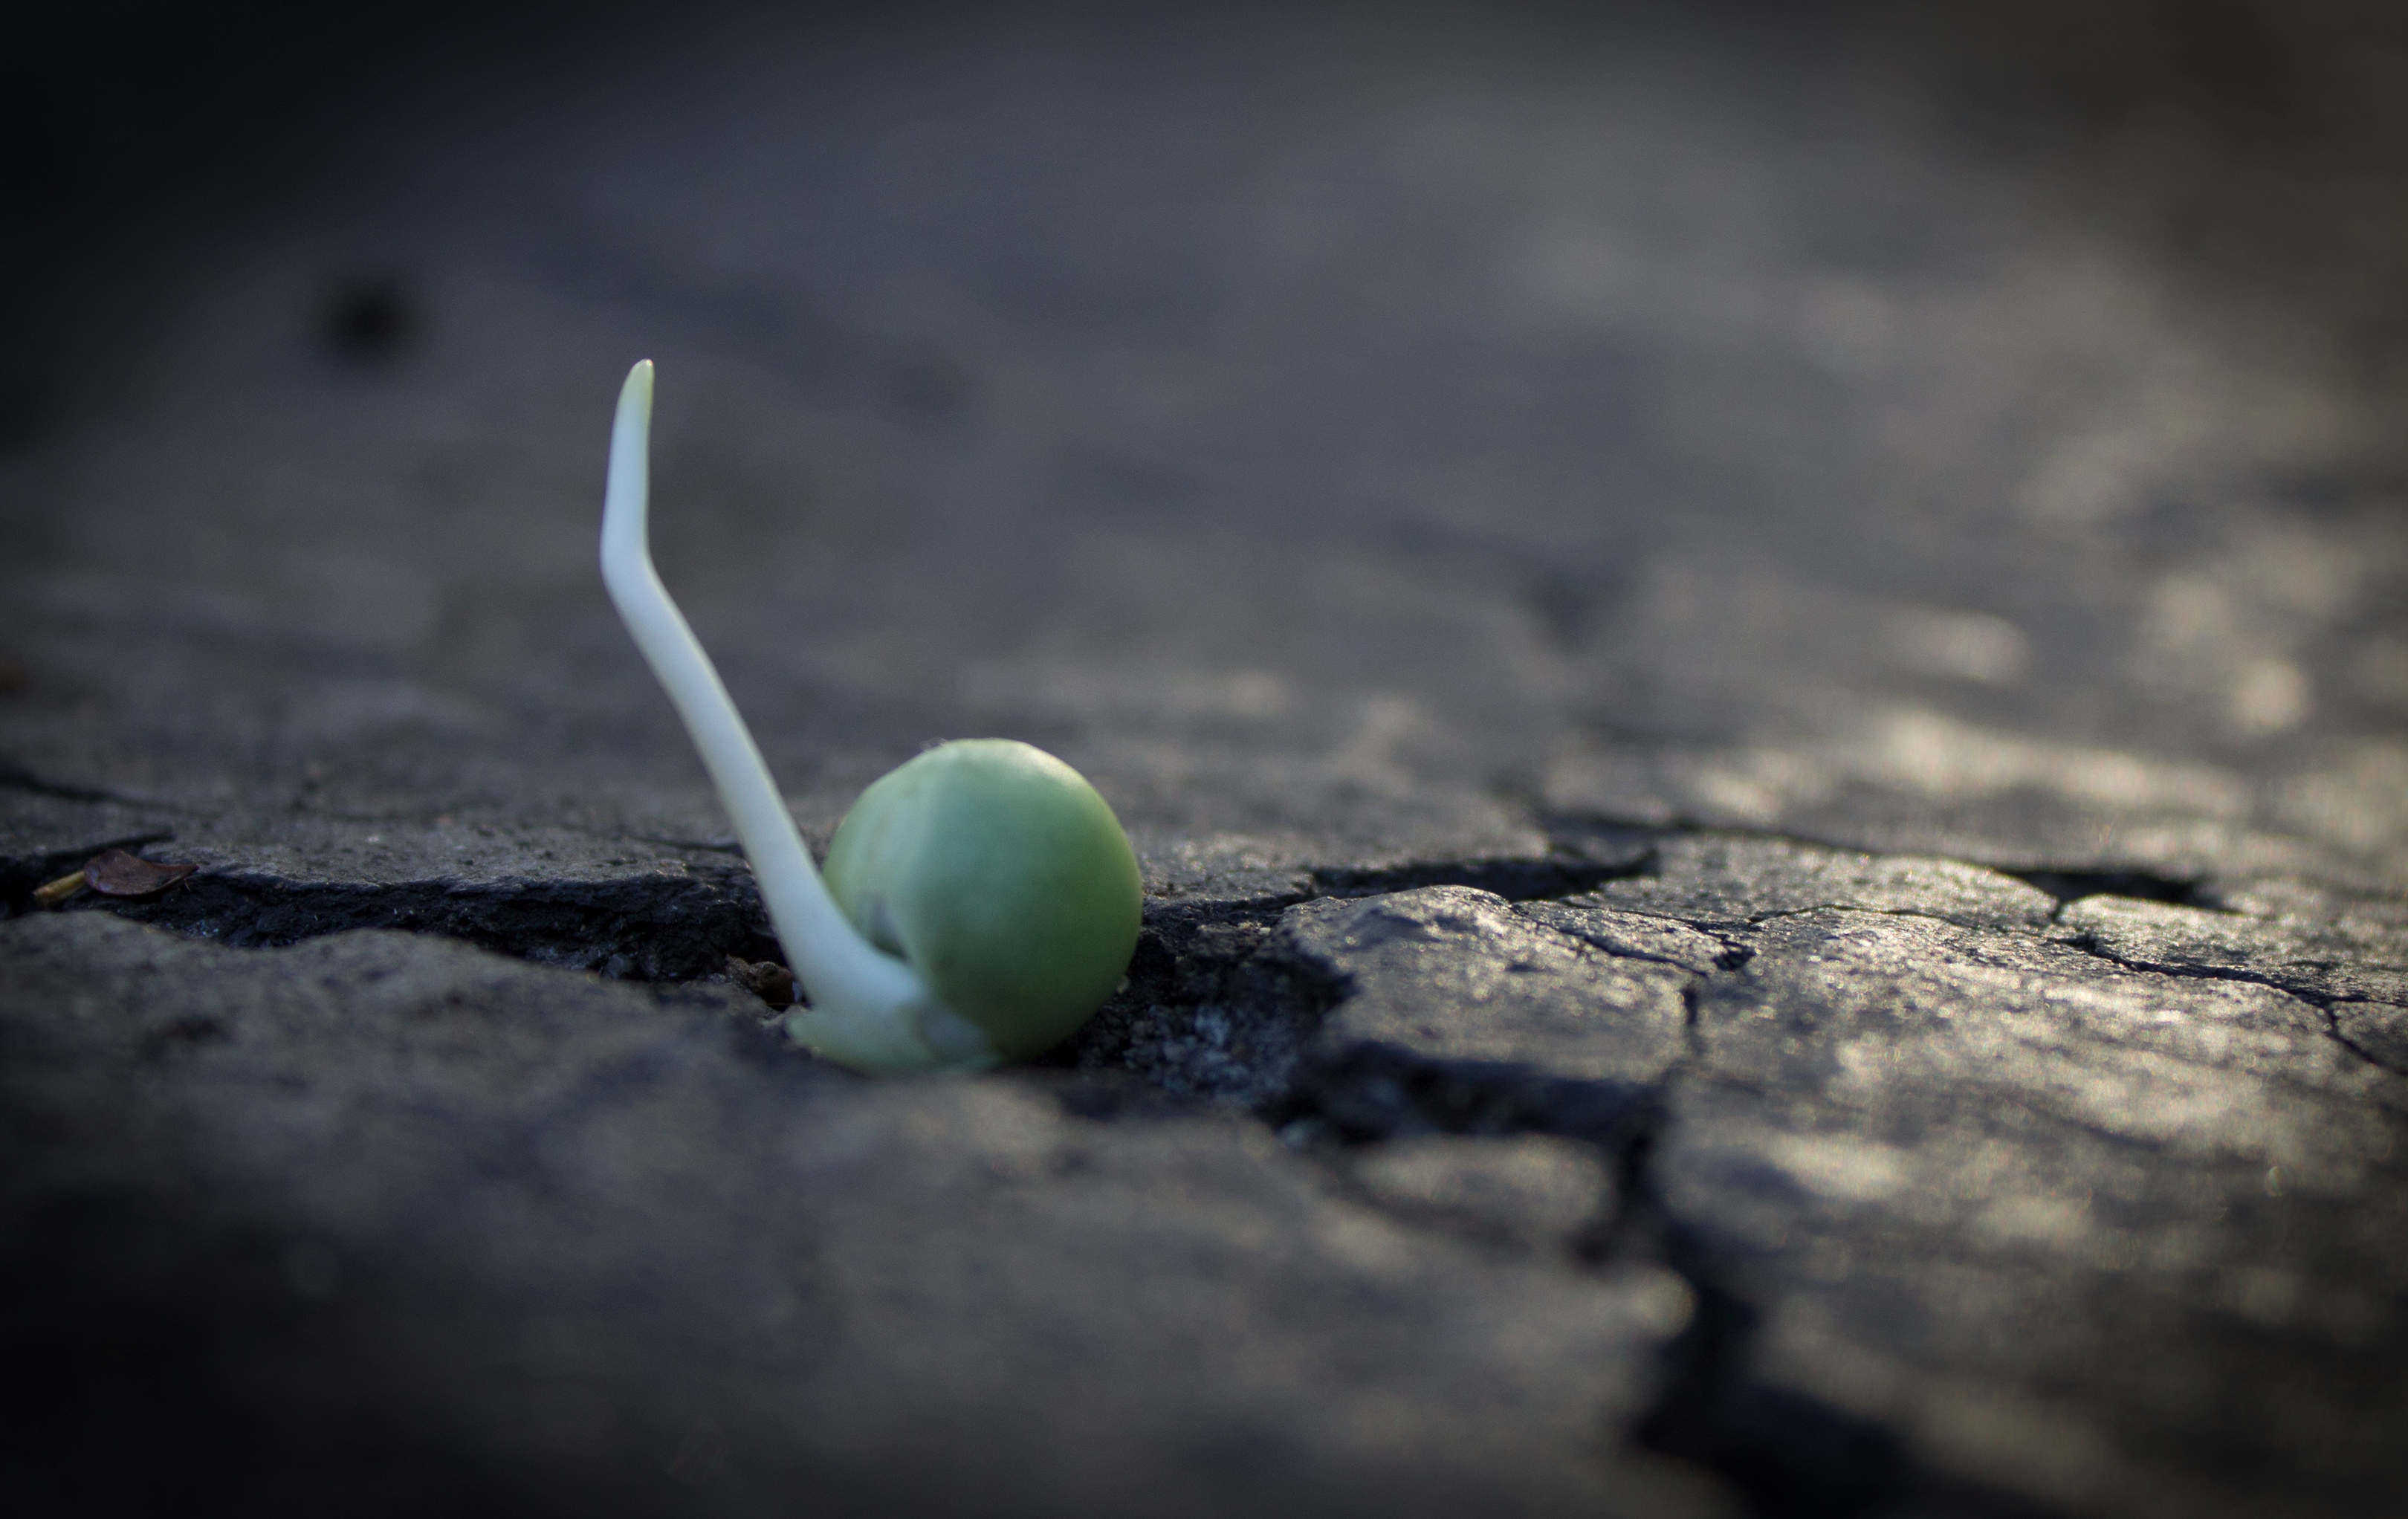 This is a picture of a pea sprout in a crack. It represents reluctance through the experience of following your instincts.